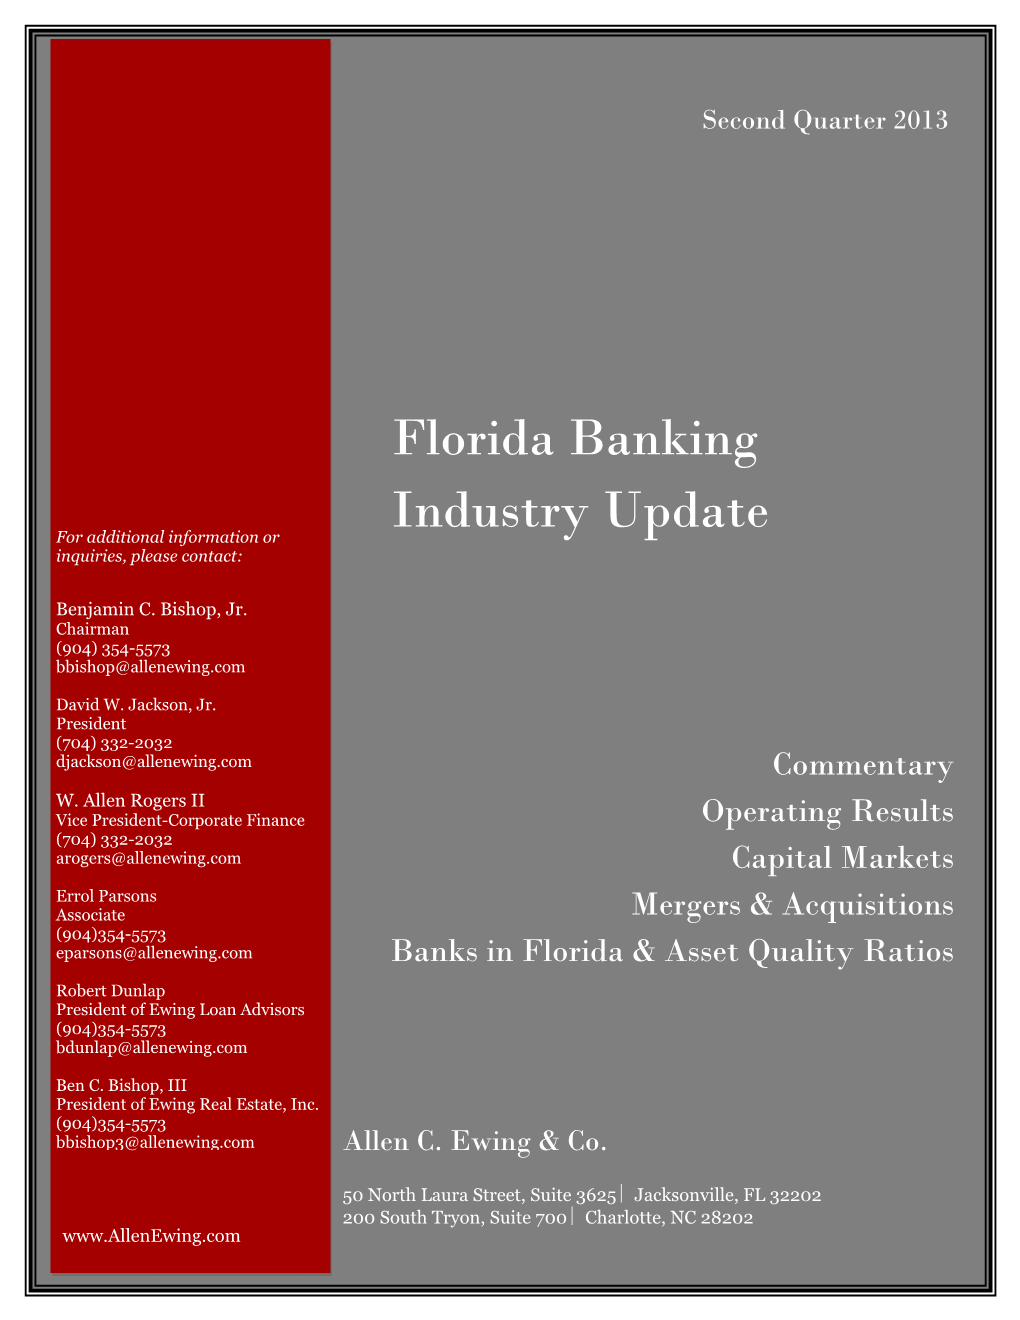 Florida Banking Industry Update